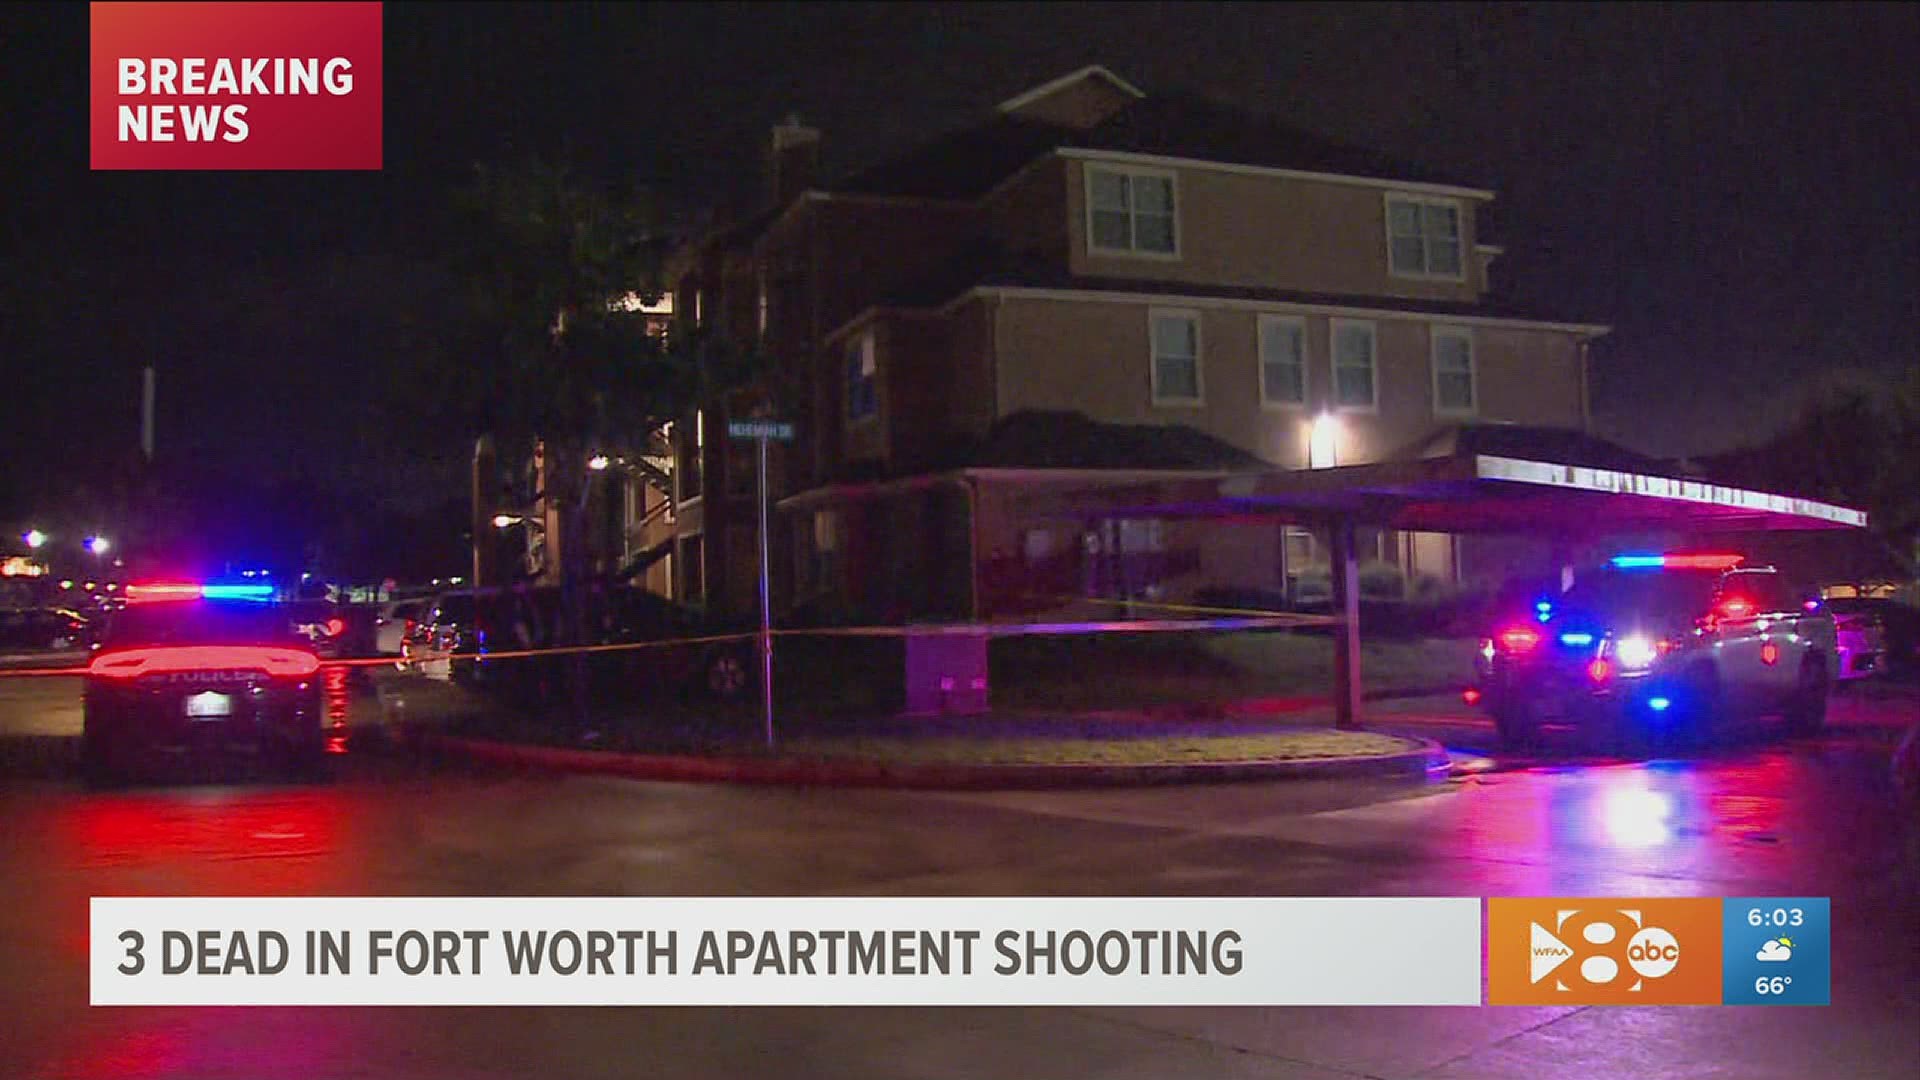 Three people were found dead inside a unit of the complex in Fort Worth, according to police.